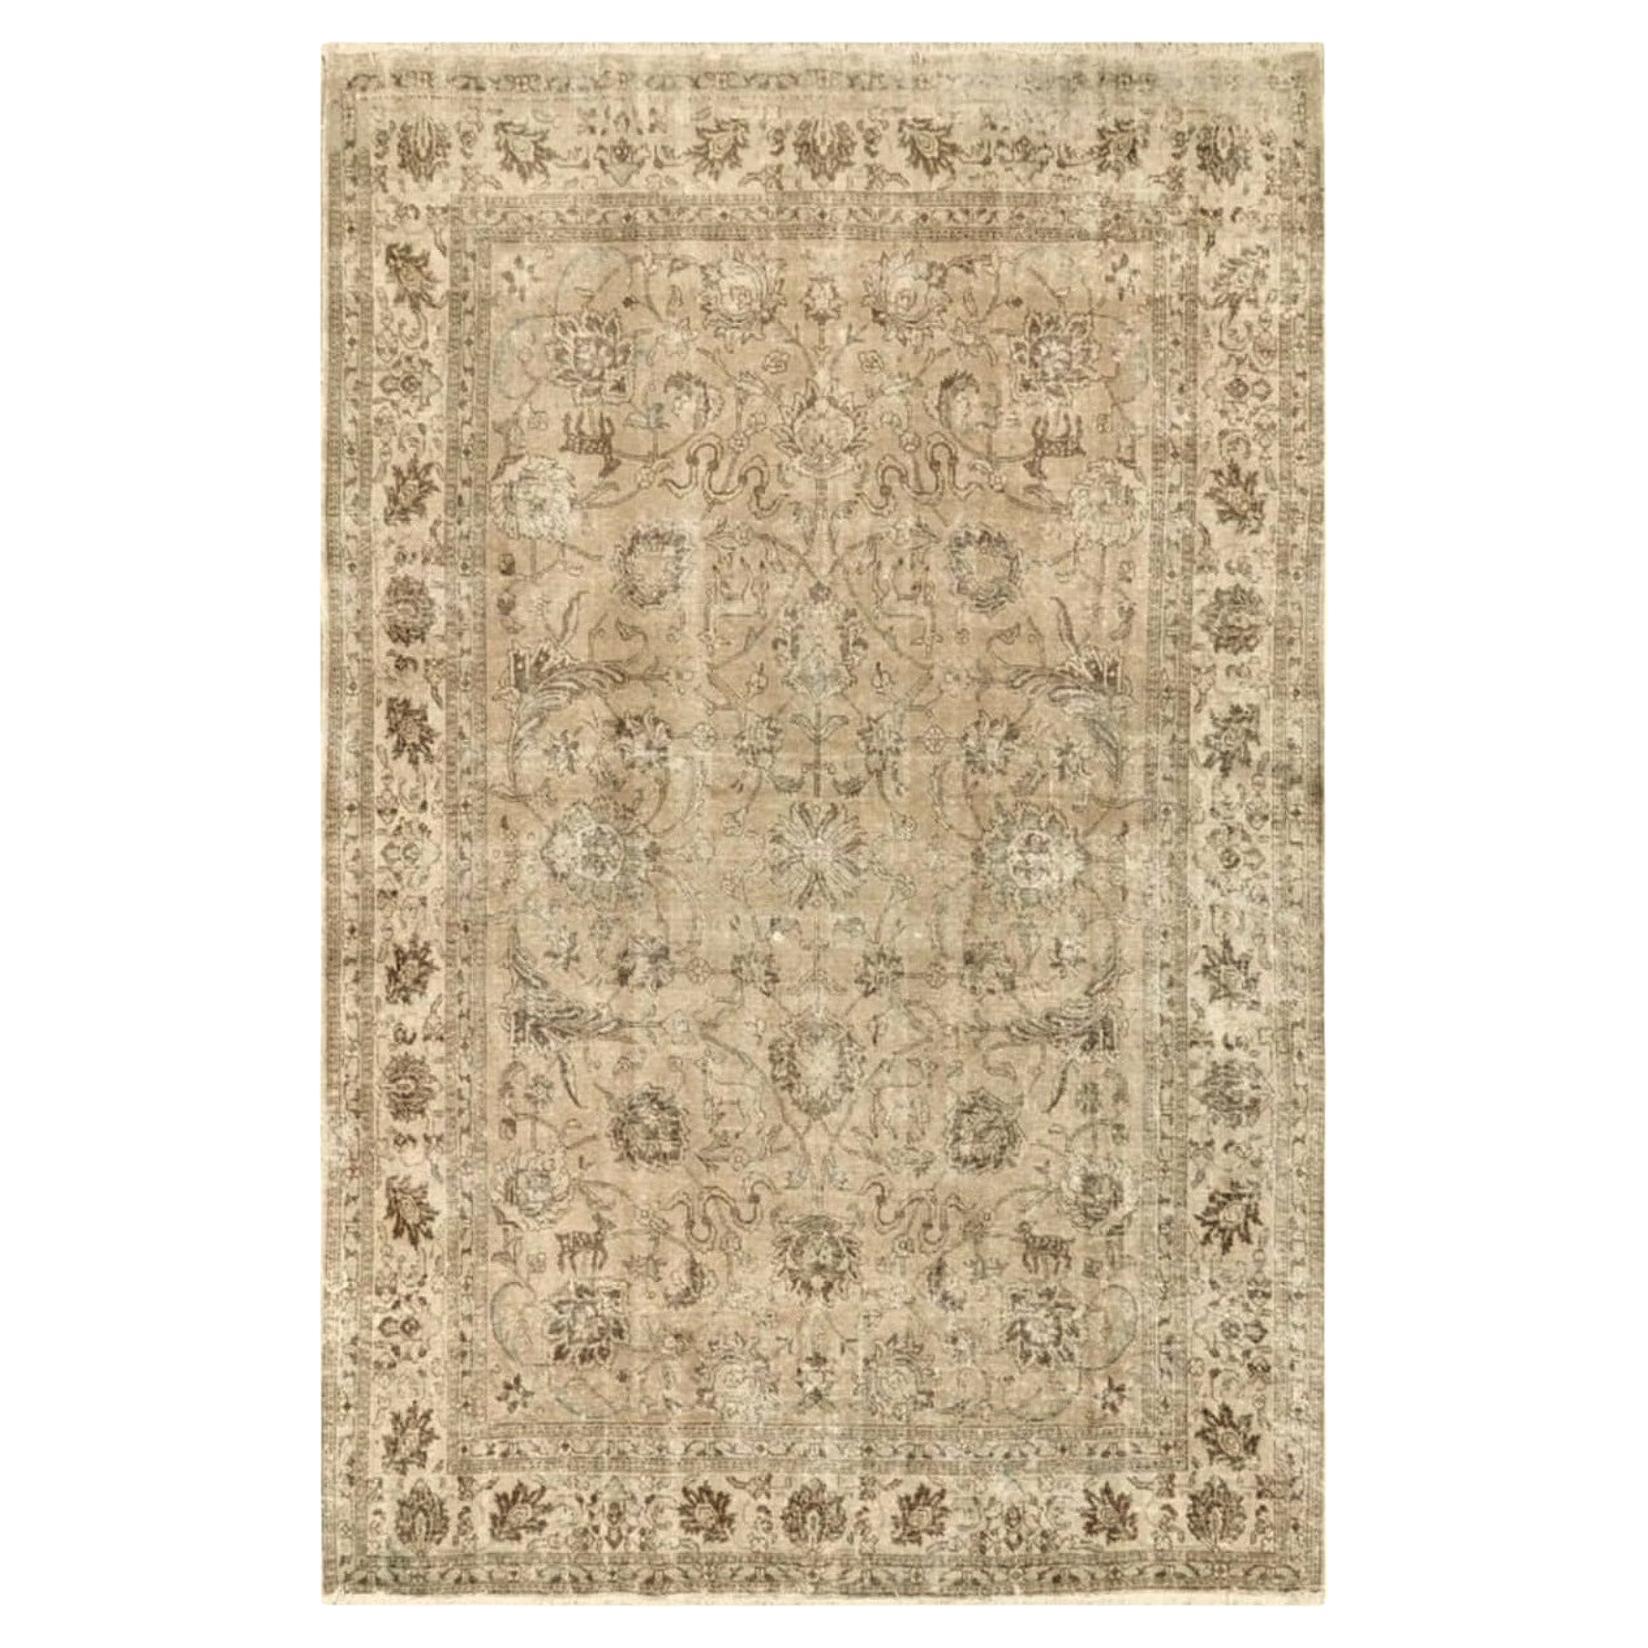 Tabriz Rug Room Size 8x11 ft Classic Vintage Muted Gray Beige Brown Hand Knotted For Sale